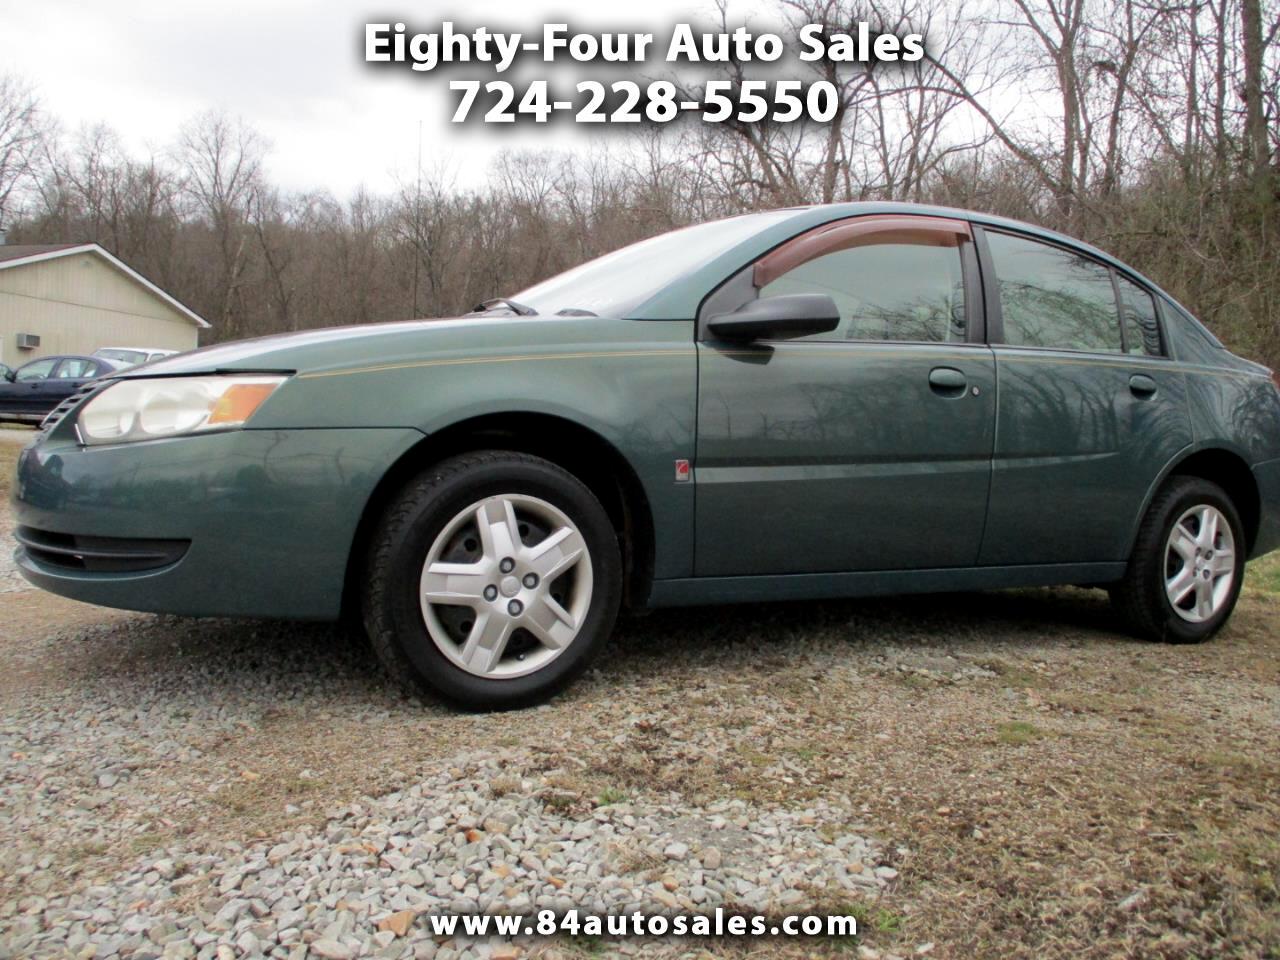 Saturn ION 4dr Sdn Auto ION 2 2007